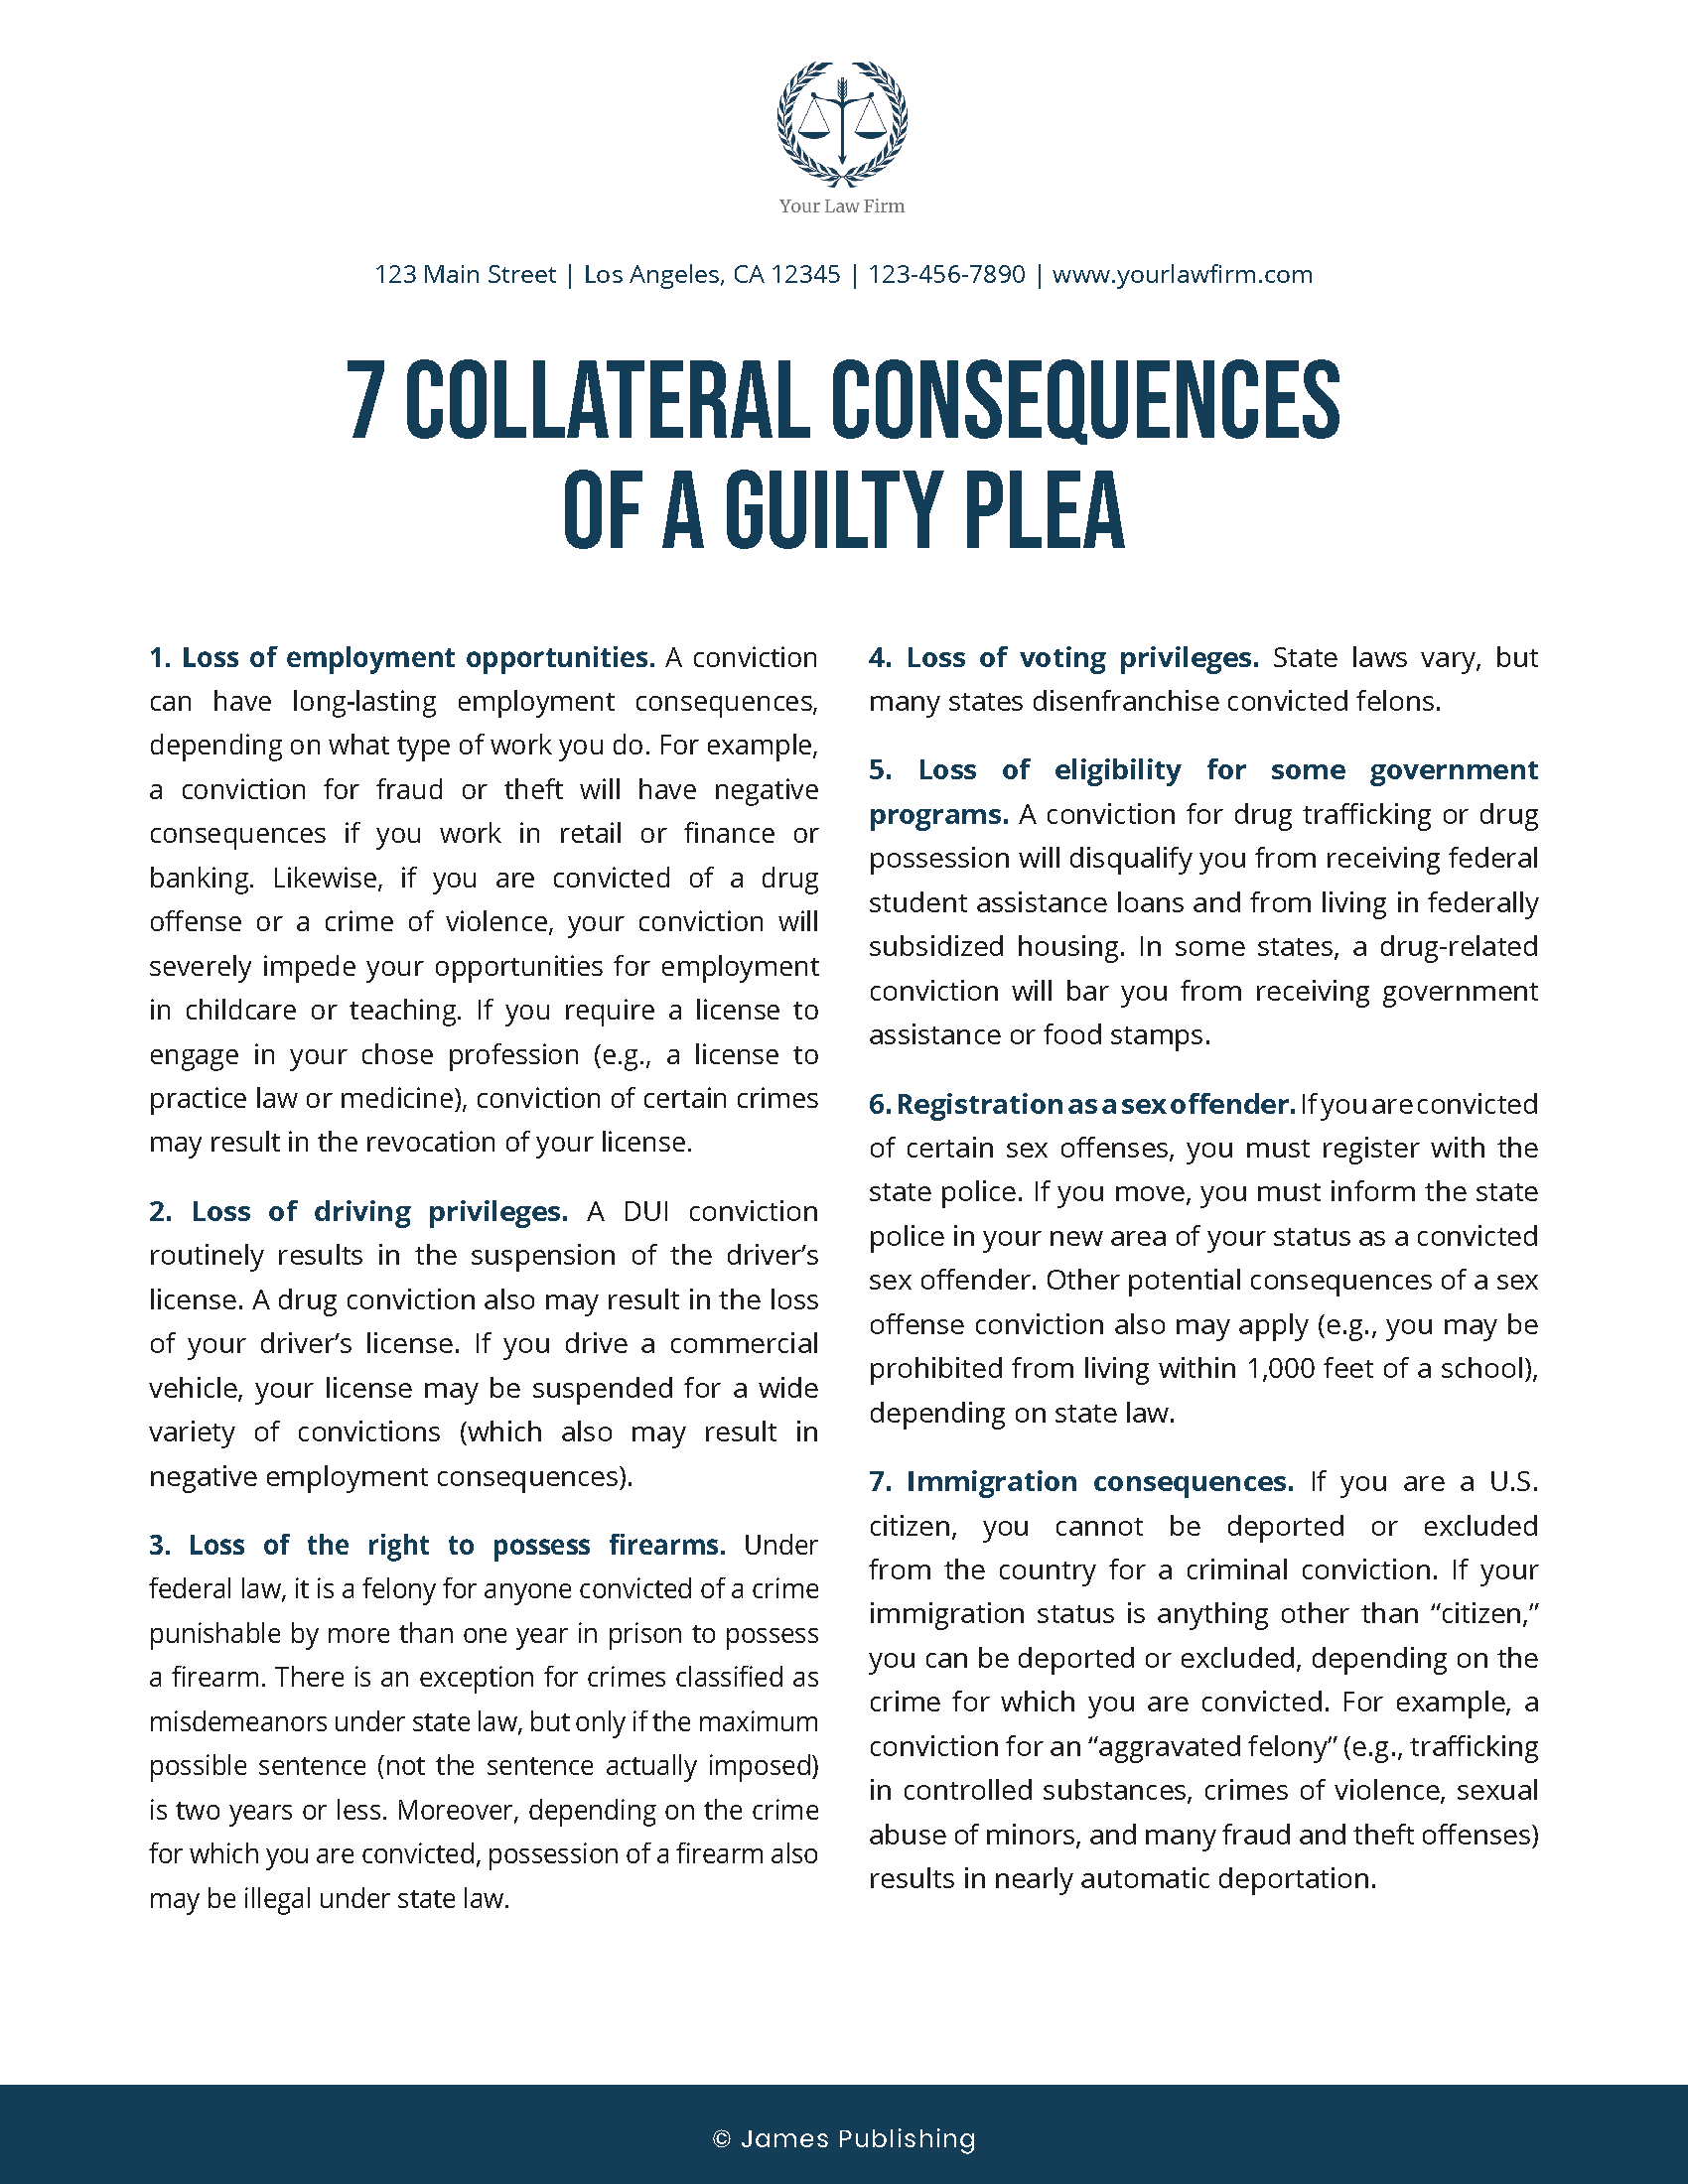 CRIM-09 7 Collateral Consequences of a Guilty Plea